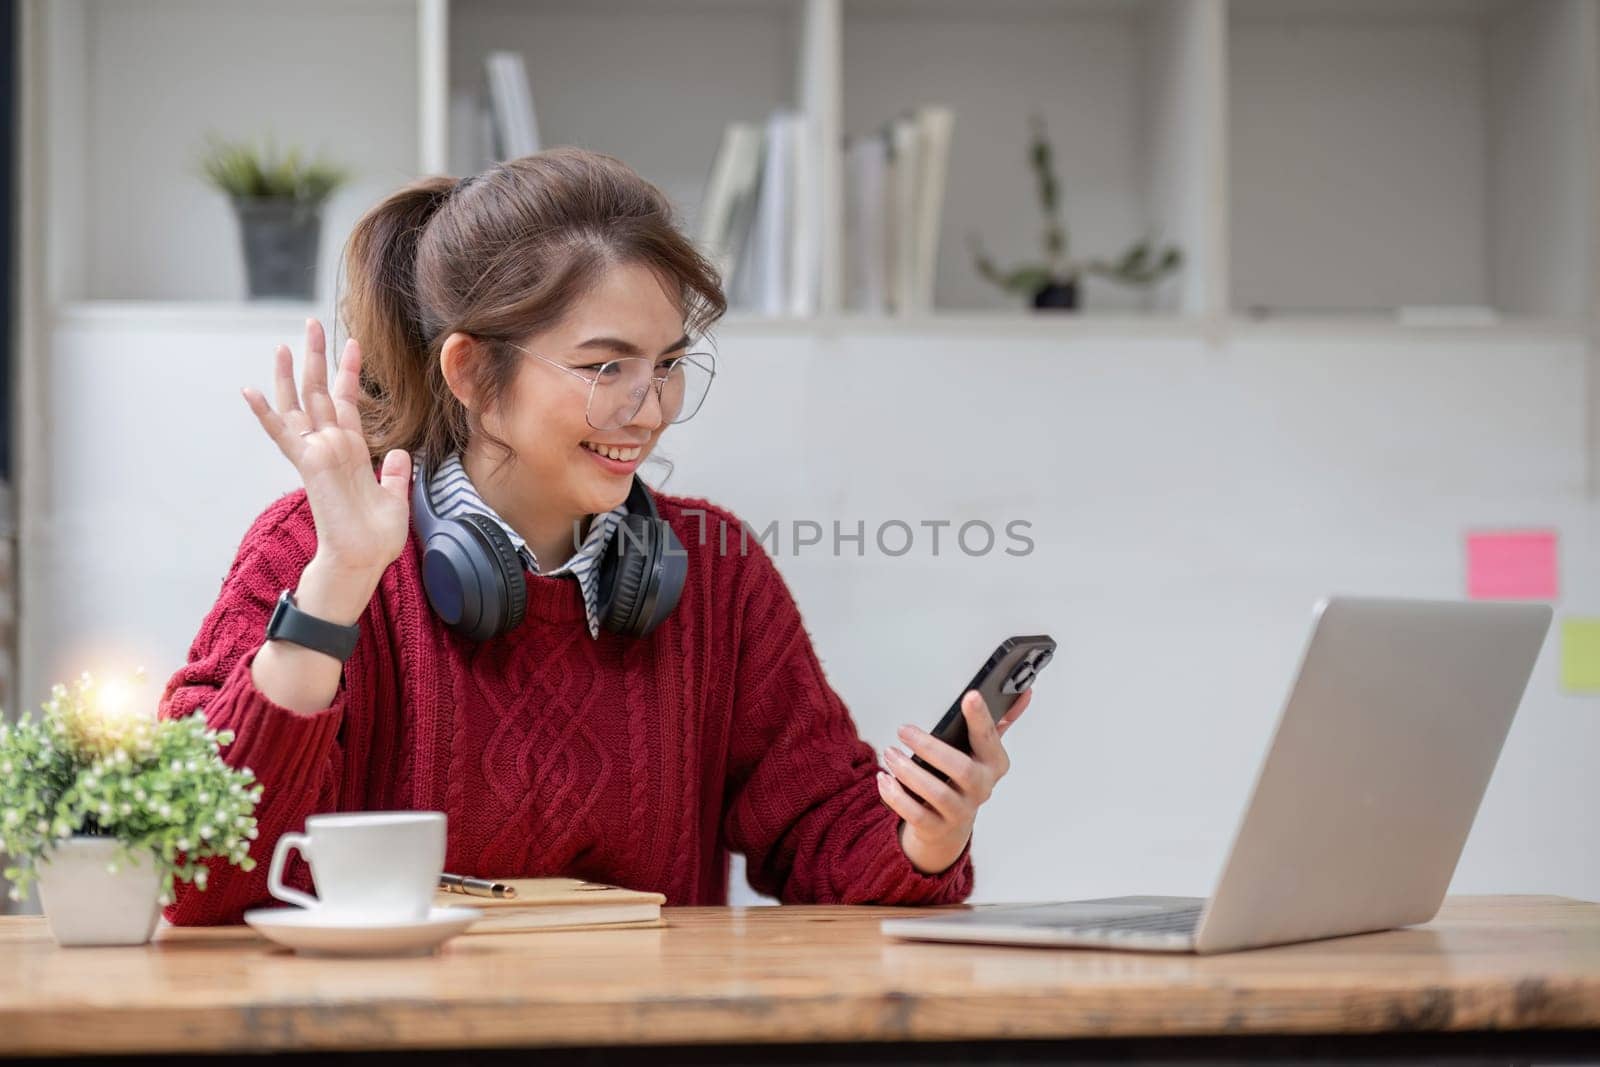 Asian female college student using laptop and phone with headphones while studying. Reading messages and greeting friends via video call by wichayada